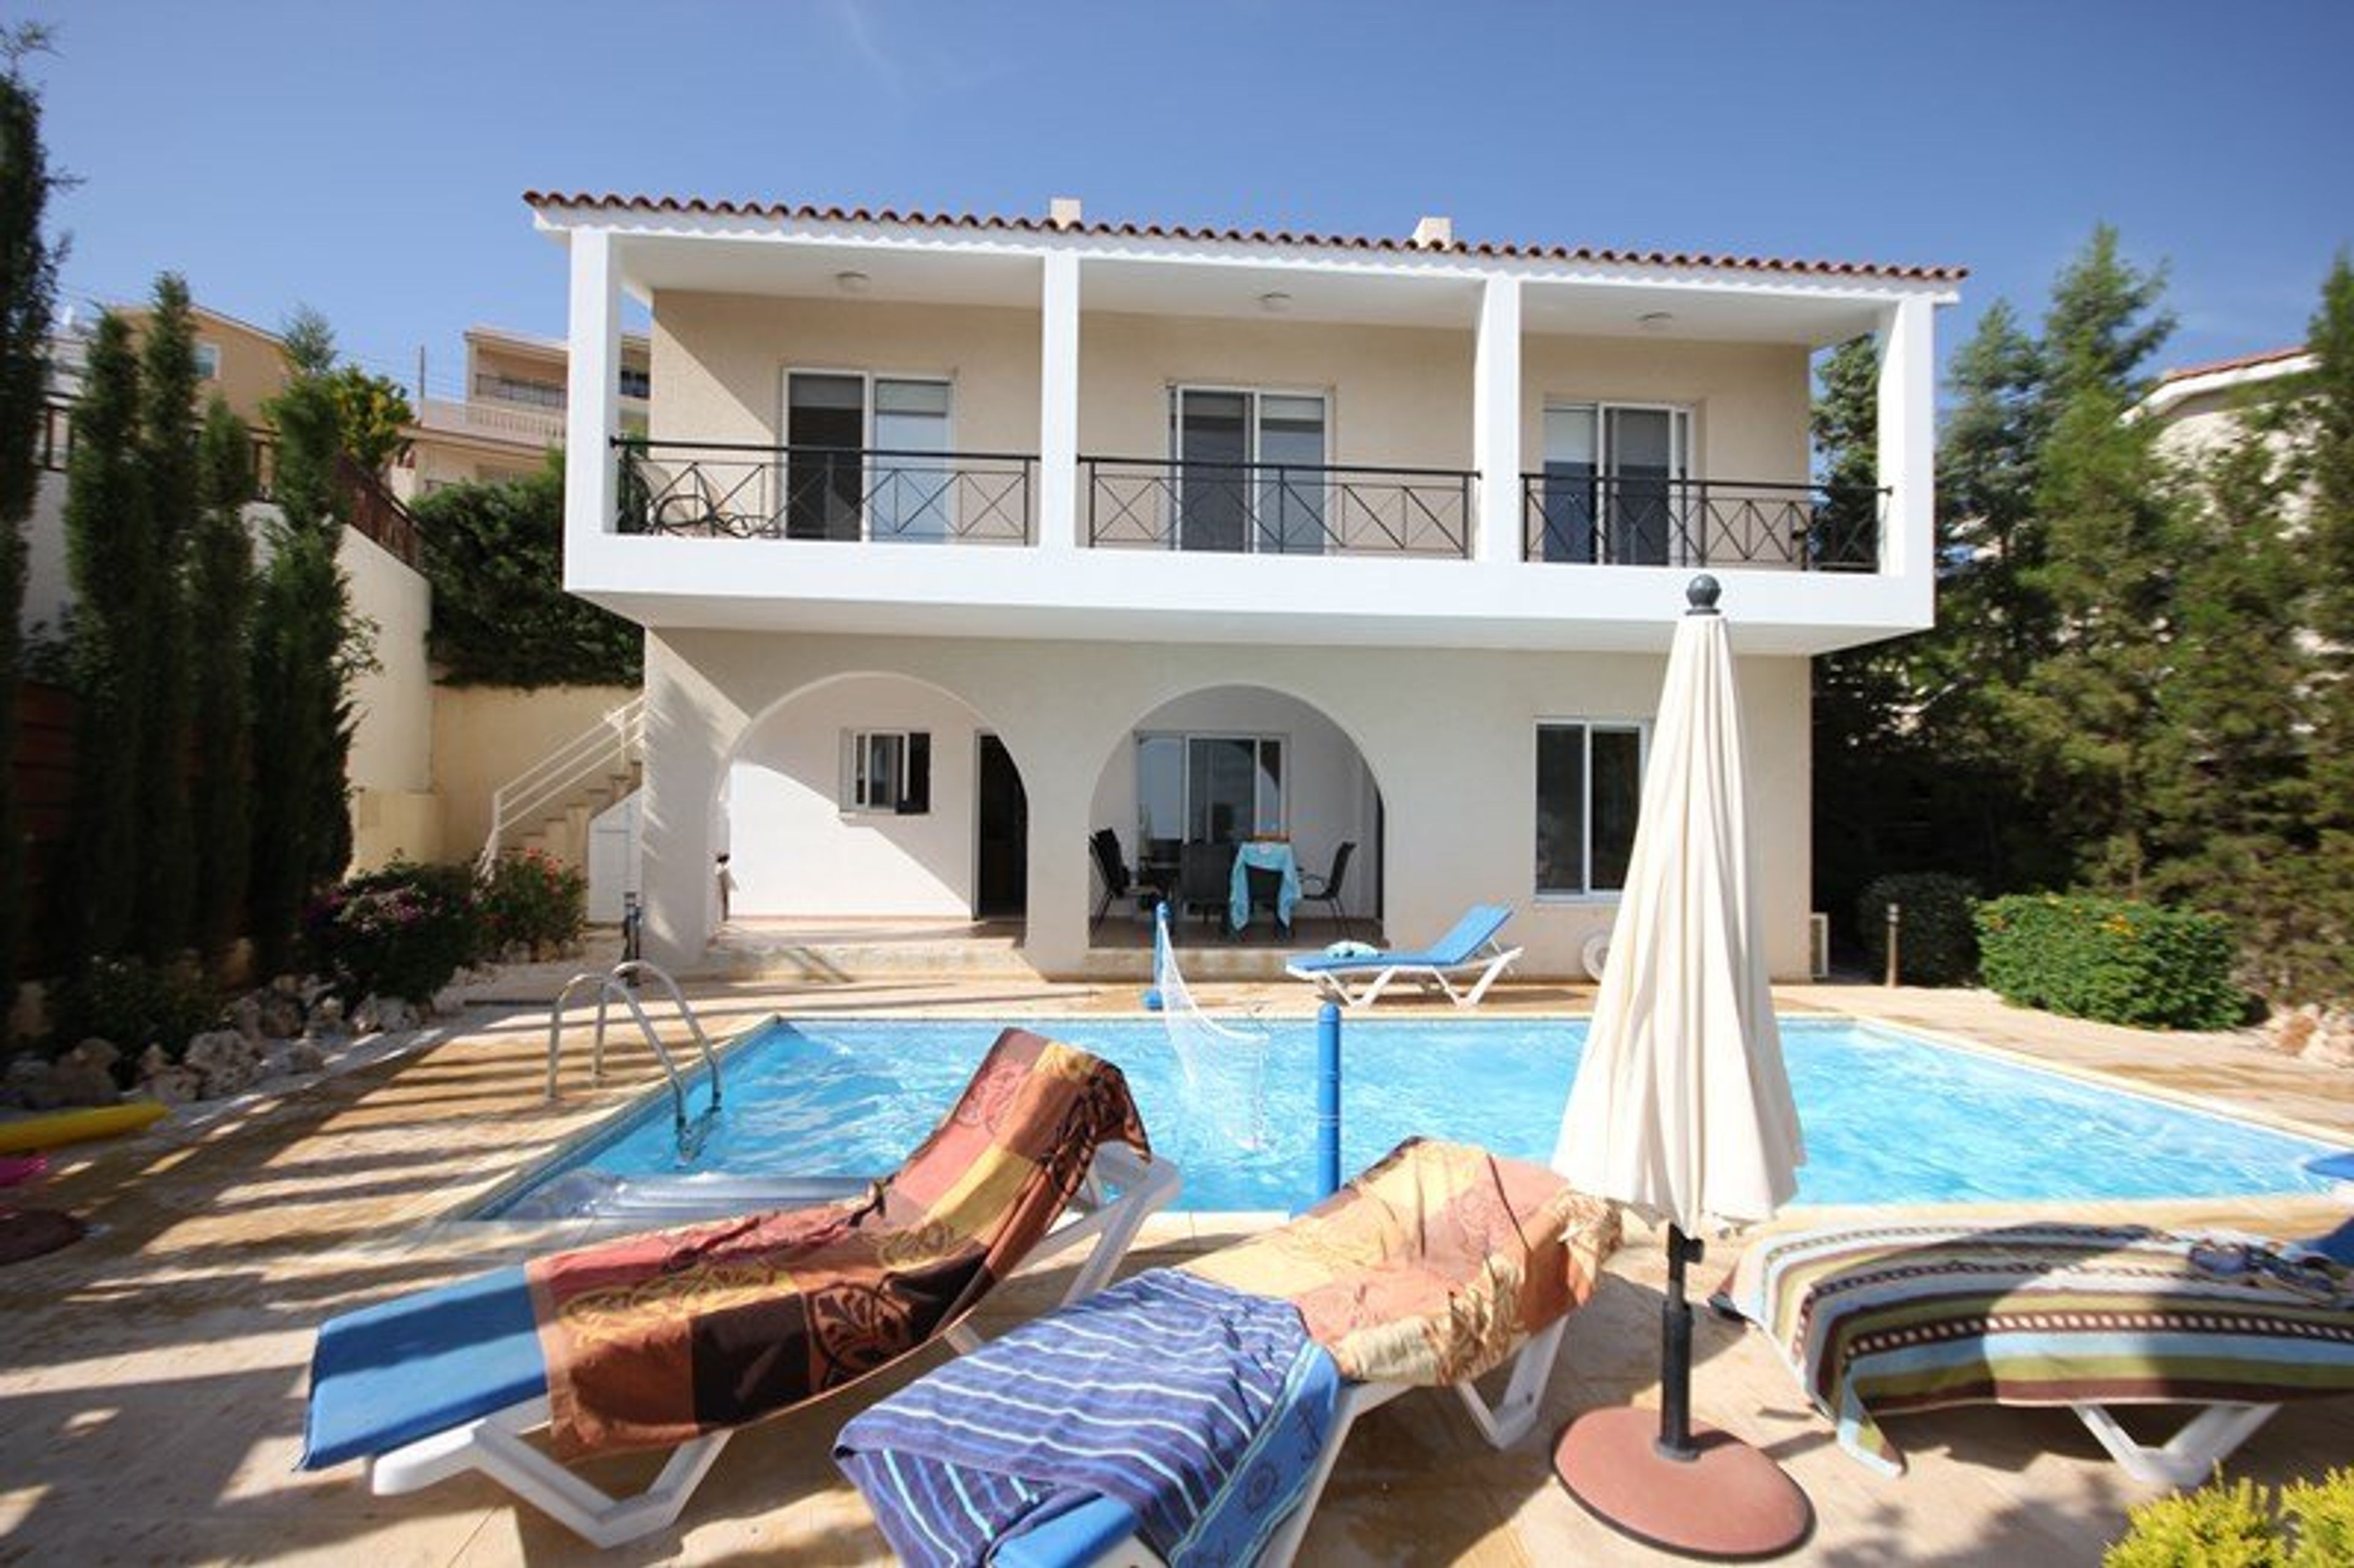 3 Bedroom Villa - Rear View with Sea views from ground and upper floors